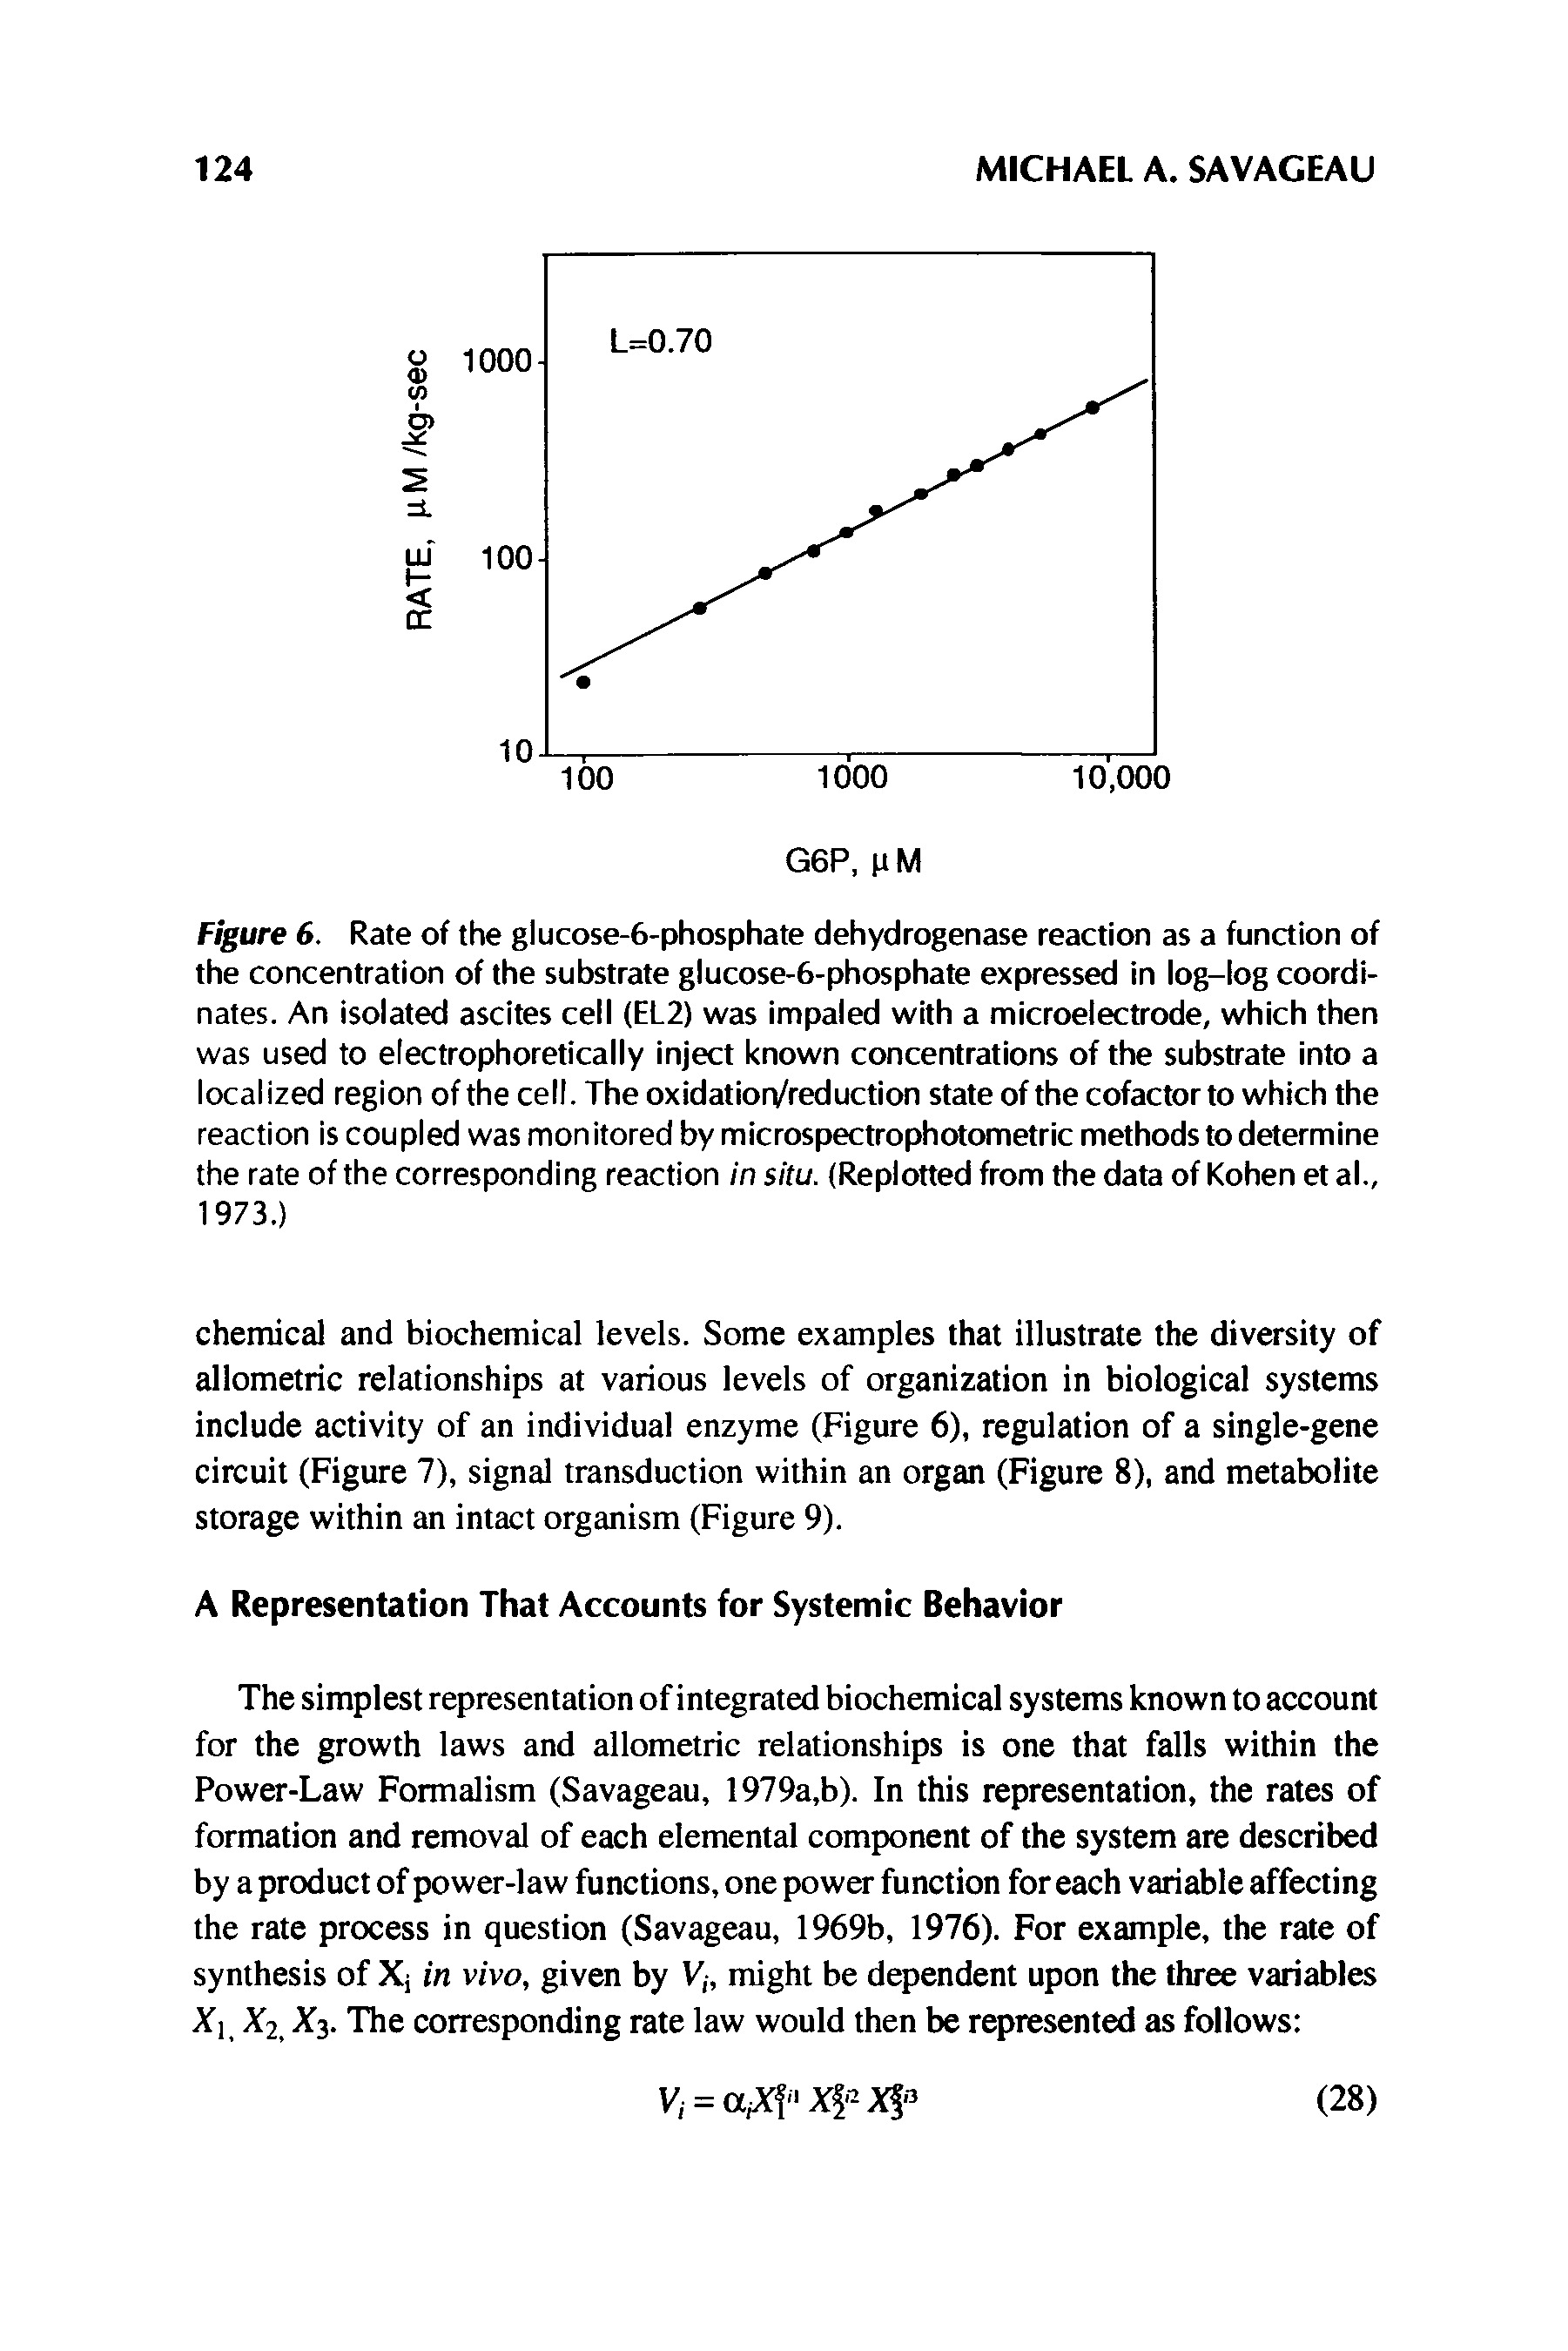 Figure 6. Rate of the glucose-6-phosphate dehydrogenase reaction as a function of the concentration of the substrate glucose-6-phosphate expressed in log-log coordinates. An isolated ascites cell (EL2) was impaled with a microelectrode, which then was used to electrophoretically inject known concentrations of the substrate into a localized region of the cell. The oxidatiorVreduction state of the cofactor to which the reaction is coupled was monitored by microspectrophotometric methods to determine the rate of the corresponding reaction in situ. (Replotted from the data of Kohen et al., 1973.)...